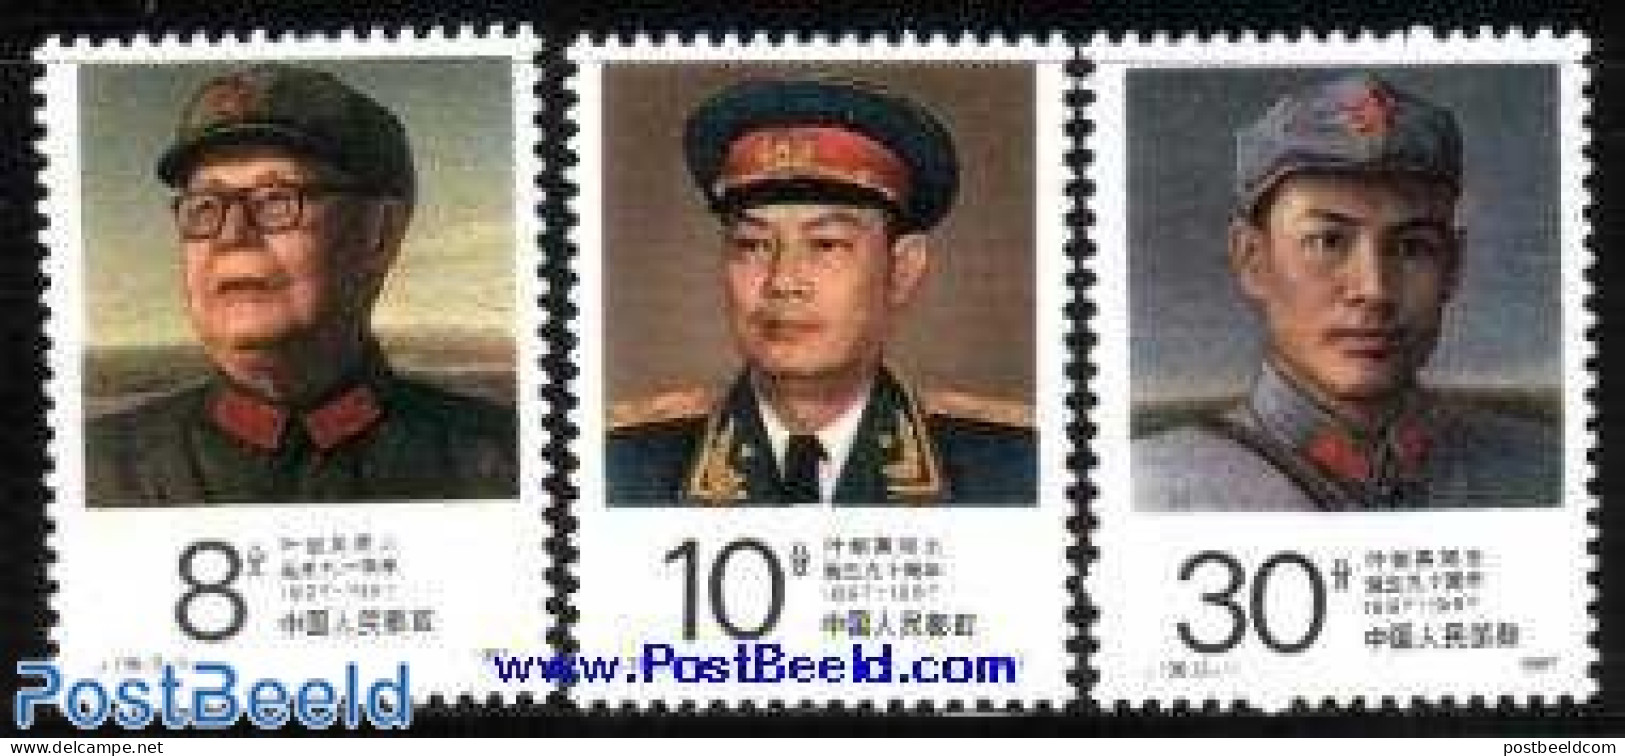 China People’s Republic 1987 Ye Jiangying 3v, Mint NH - Unused Stamps